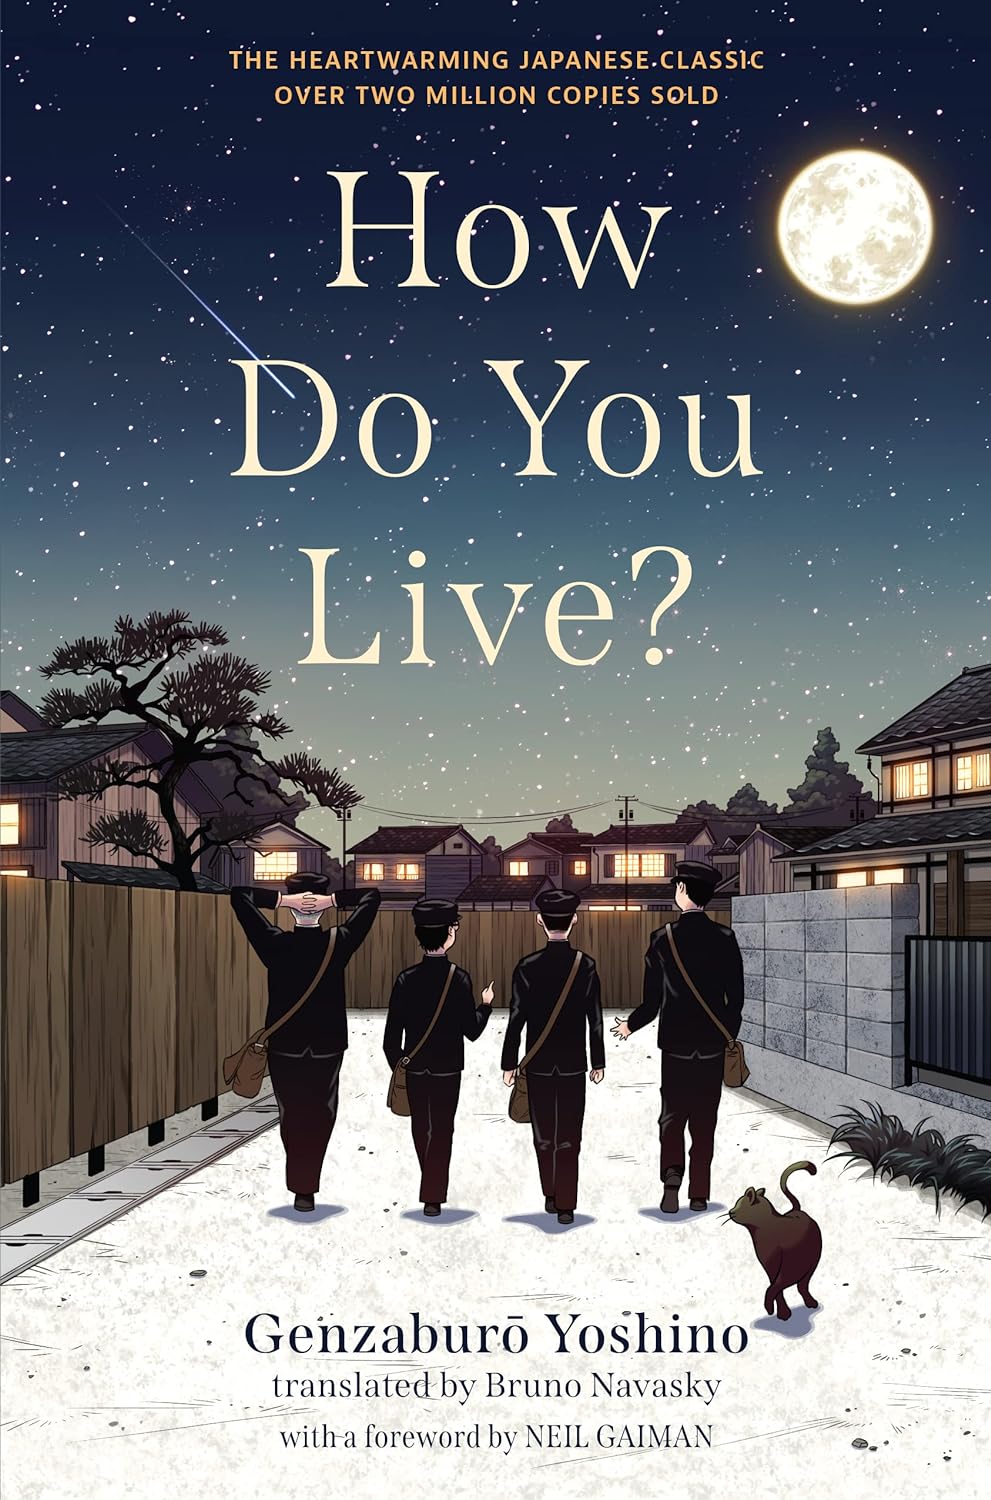 How Do You Live? (2021, Algonquin Books of Chapel Hill)